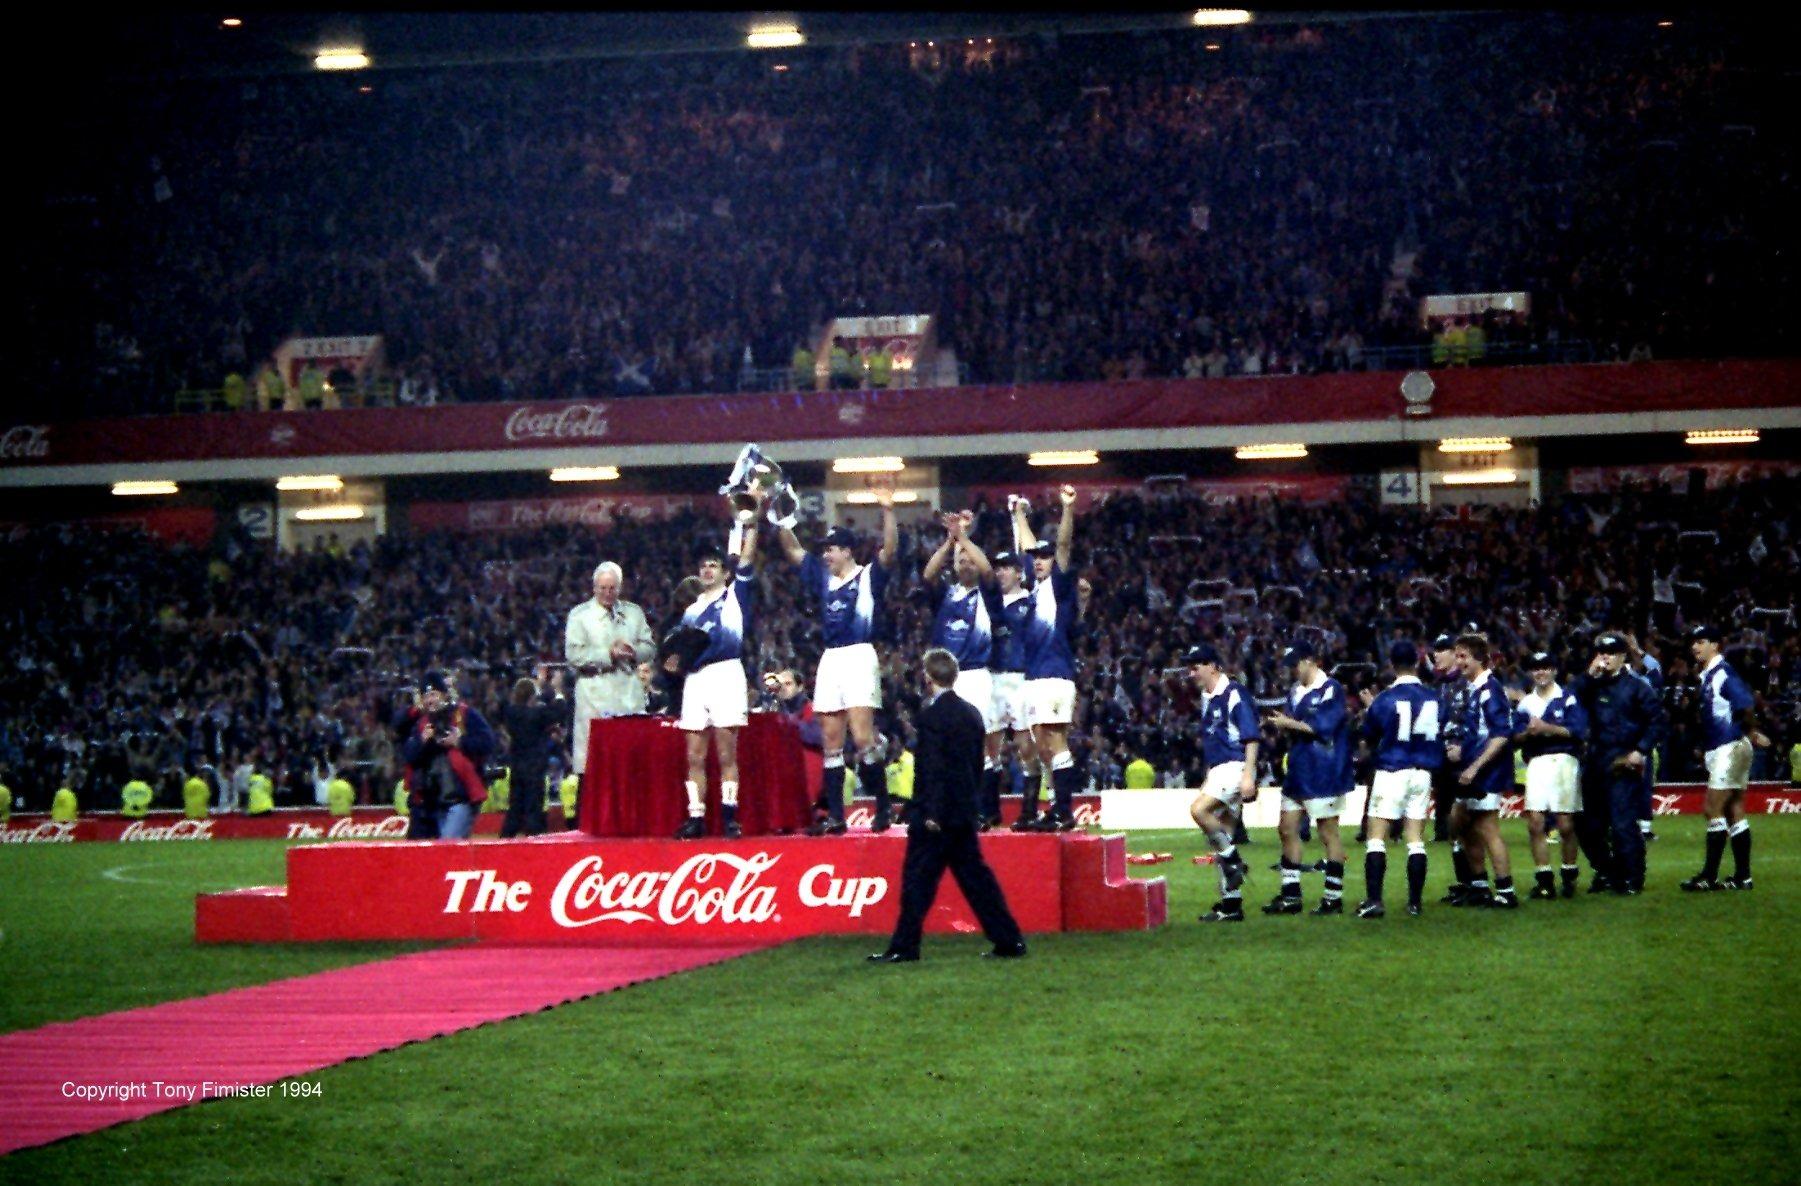 Raith Rovers win Coca Cola Cup in 1994, beating Celtic in the final at Ibrox.